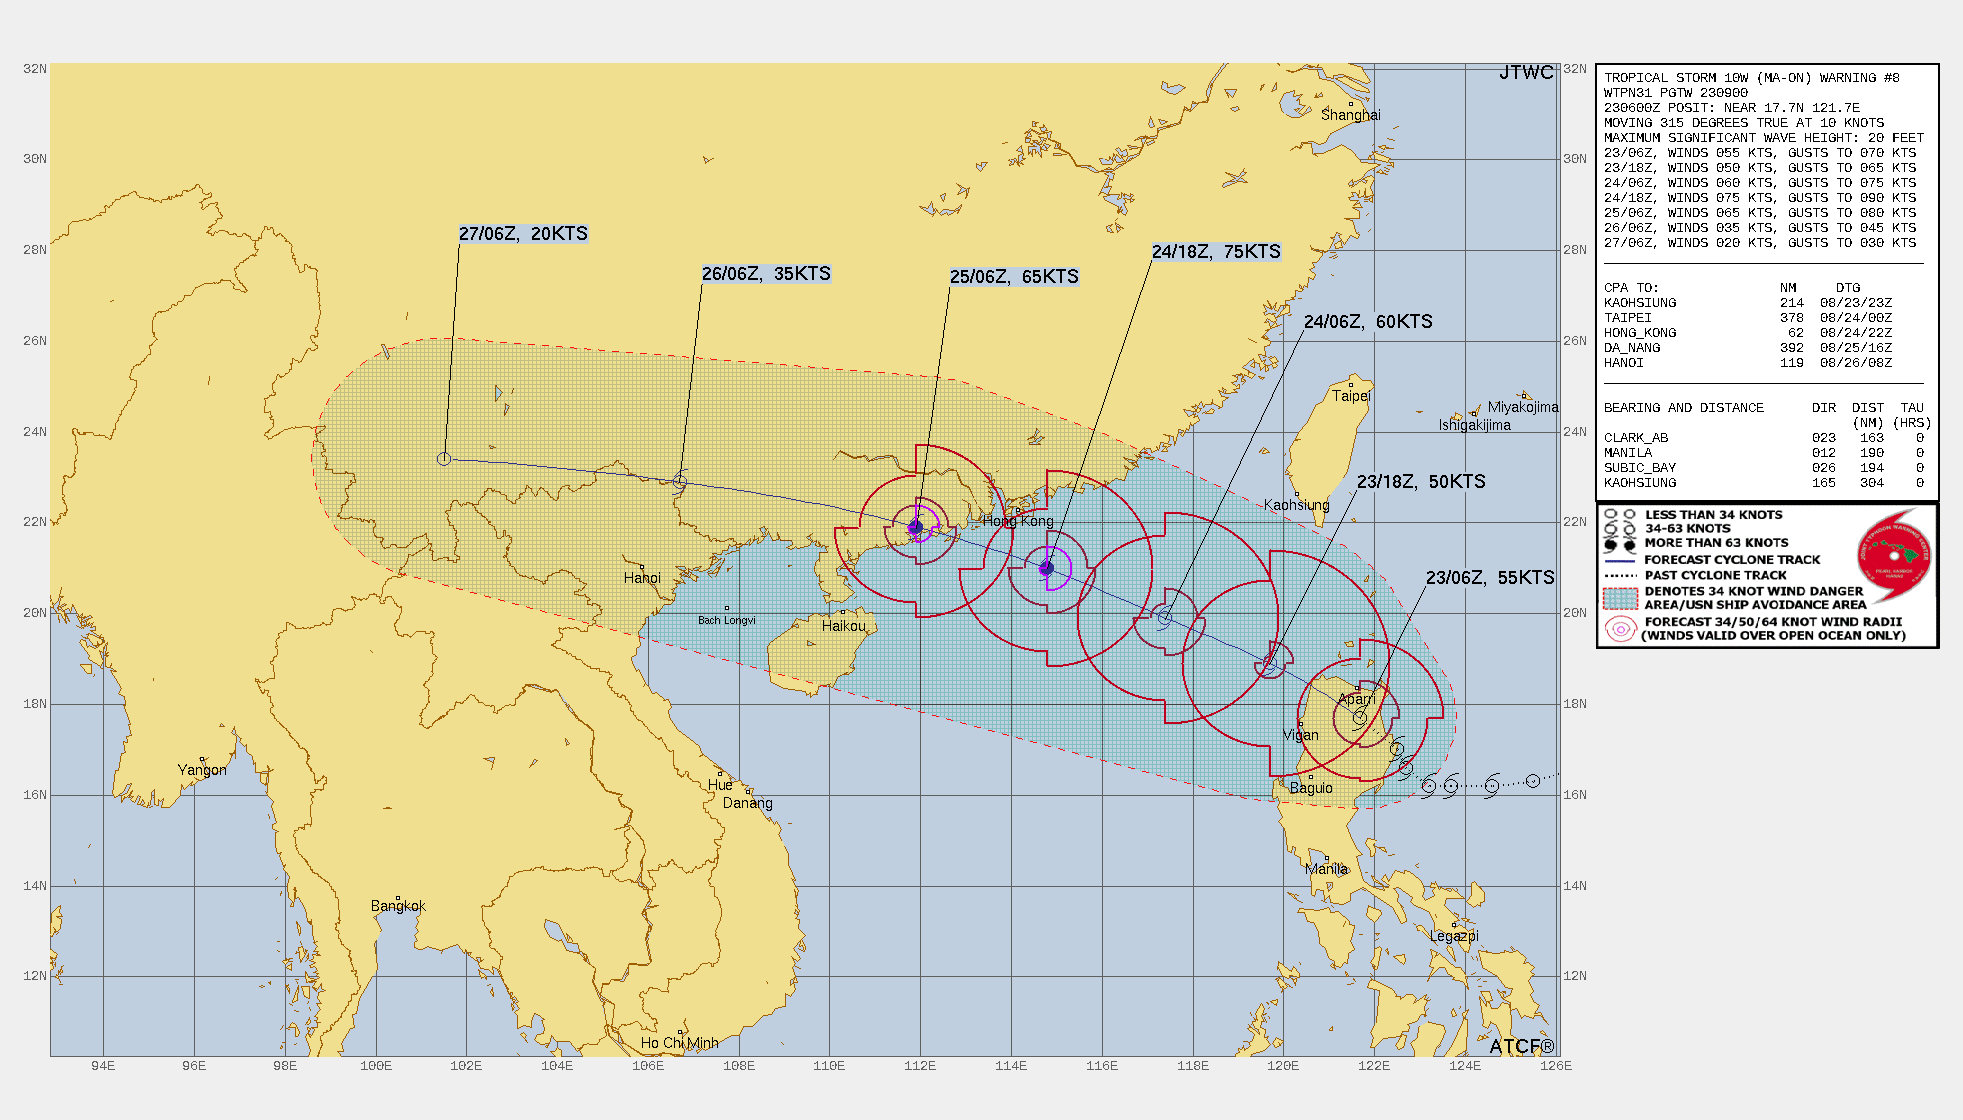 FORECAST REASONING.  SIGNIFICANT FORECAST CHANGES: THERE ARE NO SIGNIFICANT CHANGES TO THE FORECAST FROM THE PREVIOUS WARNING.  FORECAST DISCUSSION: TS 10W IS FORECAST TO TRACK WEST-NORTHWESTWARD THROUGH TAU 72 UNDER THE STEERING INFLUENCE OF THE STR, WHICH IS EXPECTED TO REMAIN ENTRENCHED OVER CENTRAL CHINA. AFTER TAU 72, THE SYSTEM WILL TURN WESTWARD AS IT TRACKS FURTHER INLAND. AFTER  TRAVERSING LUZON OVER THE NEXT SIX TO TWELVE HOURS AND WEAKENING, TS  10W SHOULD RAPIDLY RE-CONSOLIDATE DUE TO FAVORABLE UPPER-LEVEL  CONDITIONS, WARM (29-30C) SST VALUES AND HIGH OCEAN HEAT CONTENT. A  PEAK INTENSITY OF 75 KNOTS IS EXPECTED BY TAU 36 WITH RAPID WEAKENING  AFTER TAU 48 WITH LANDFALL EXPECTED WEST OF HONG KONG. TS 10W WILL  DISSIPATE OVERLAND BY TAU 96.